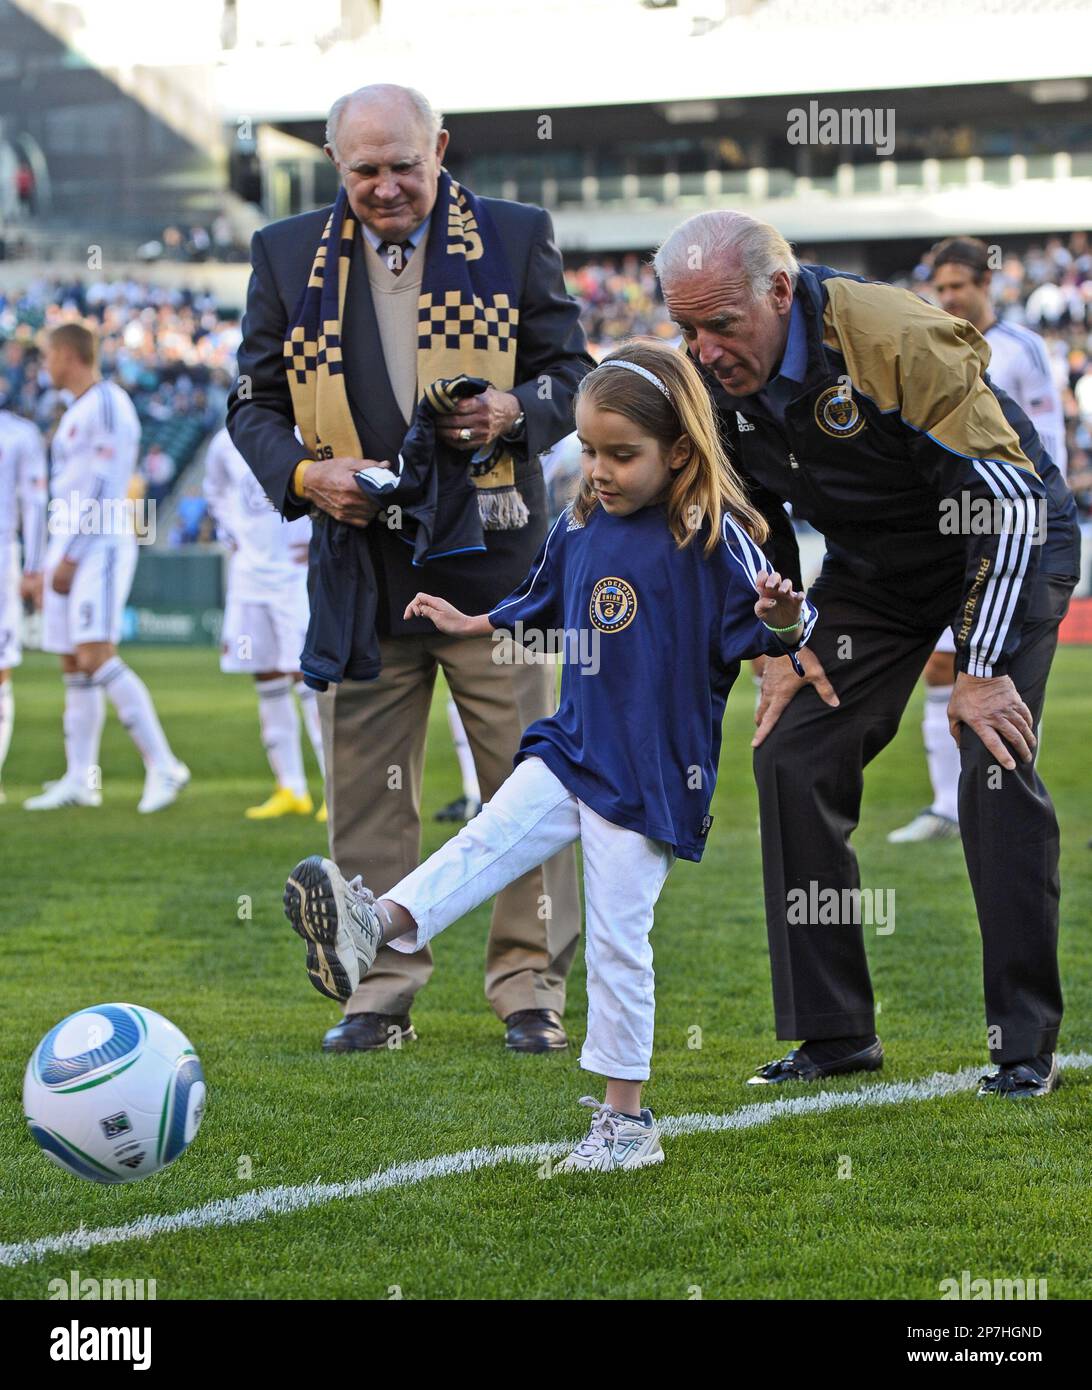 Vice President Joe Biden watches his granddaughter Natalie Biden, 5, kick out the first ball before an MLS soccer match between the Philadelphia Union and D.C. United, Saturday, April 10, 2010, in Philadelphia. (AP Photo/Drew Hallowell, POOL) Stock Photo